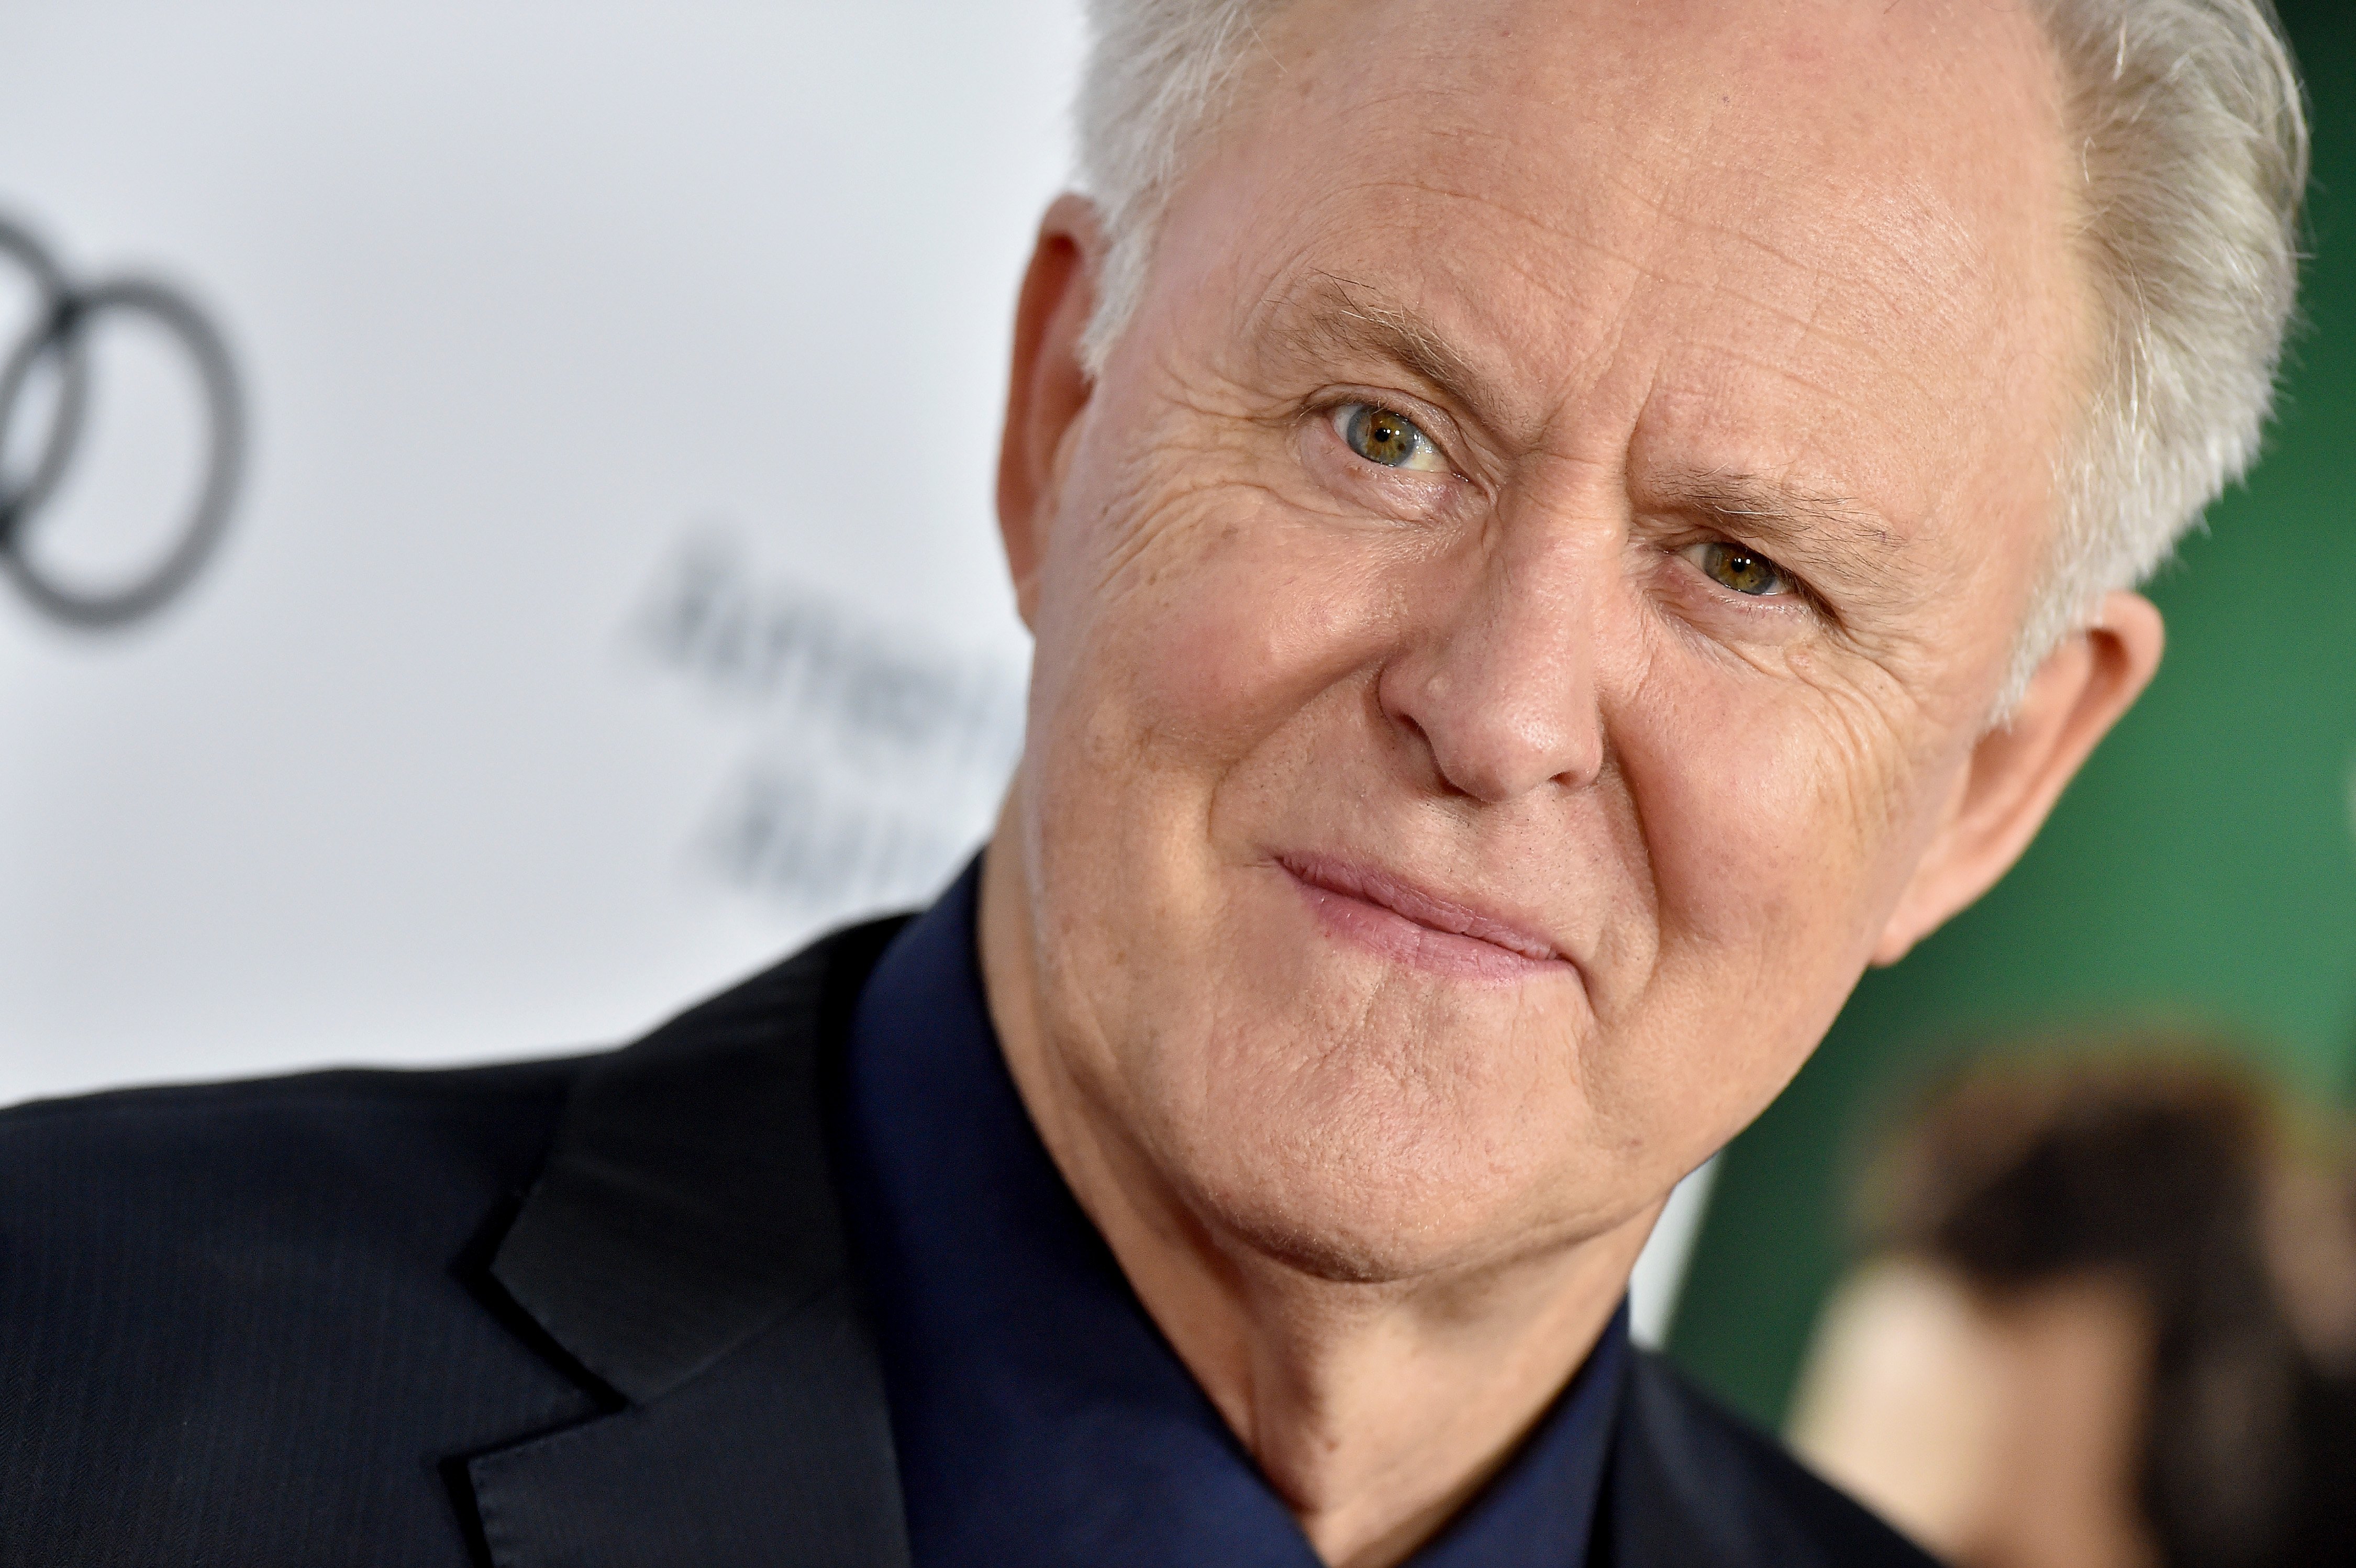 John Lithgow arrives at the premiere of 'The Crown' in 2019